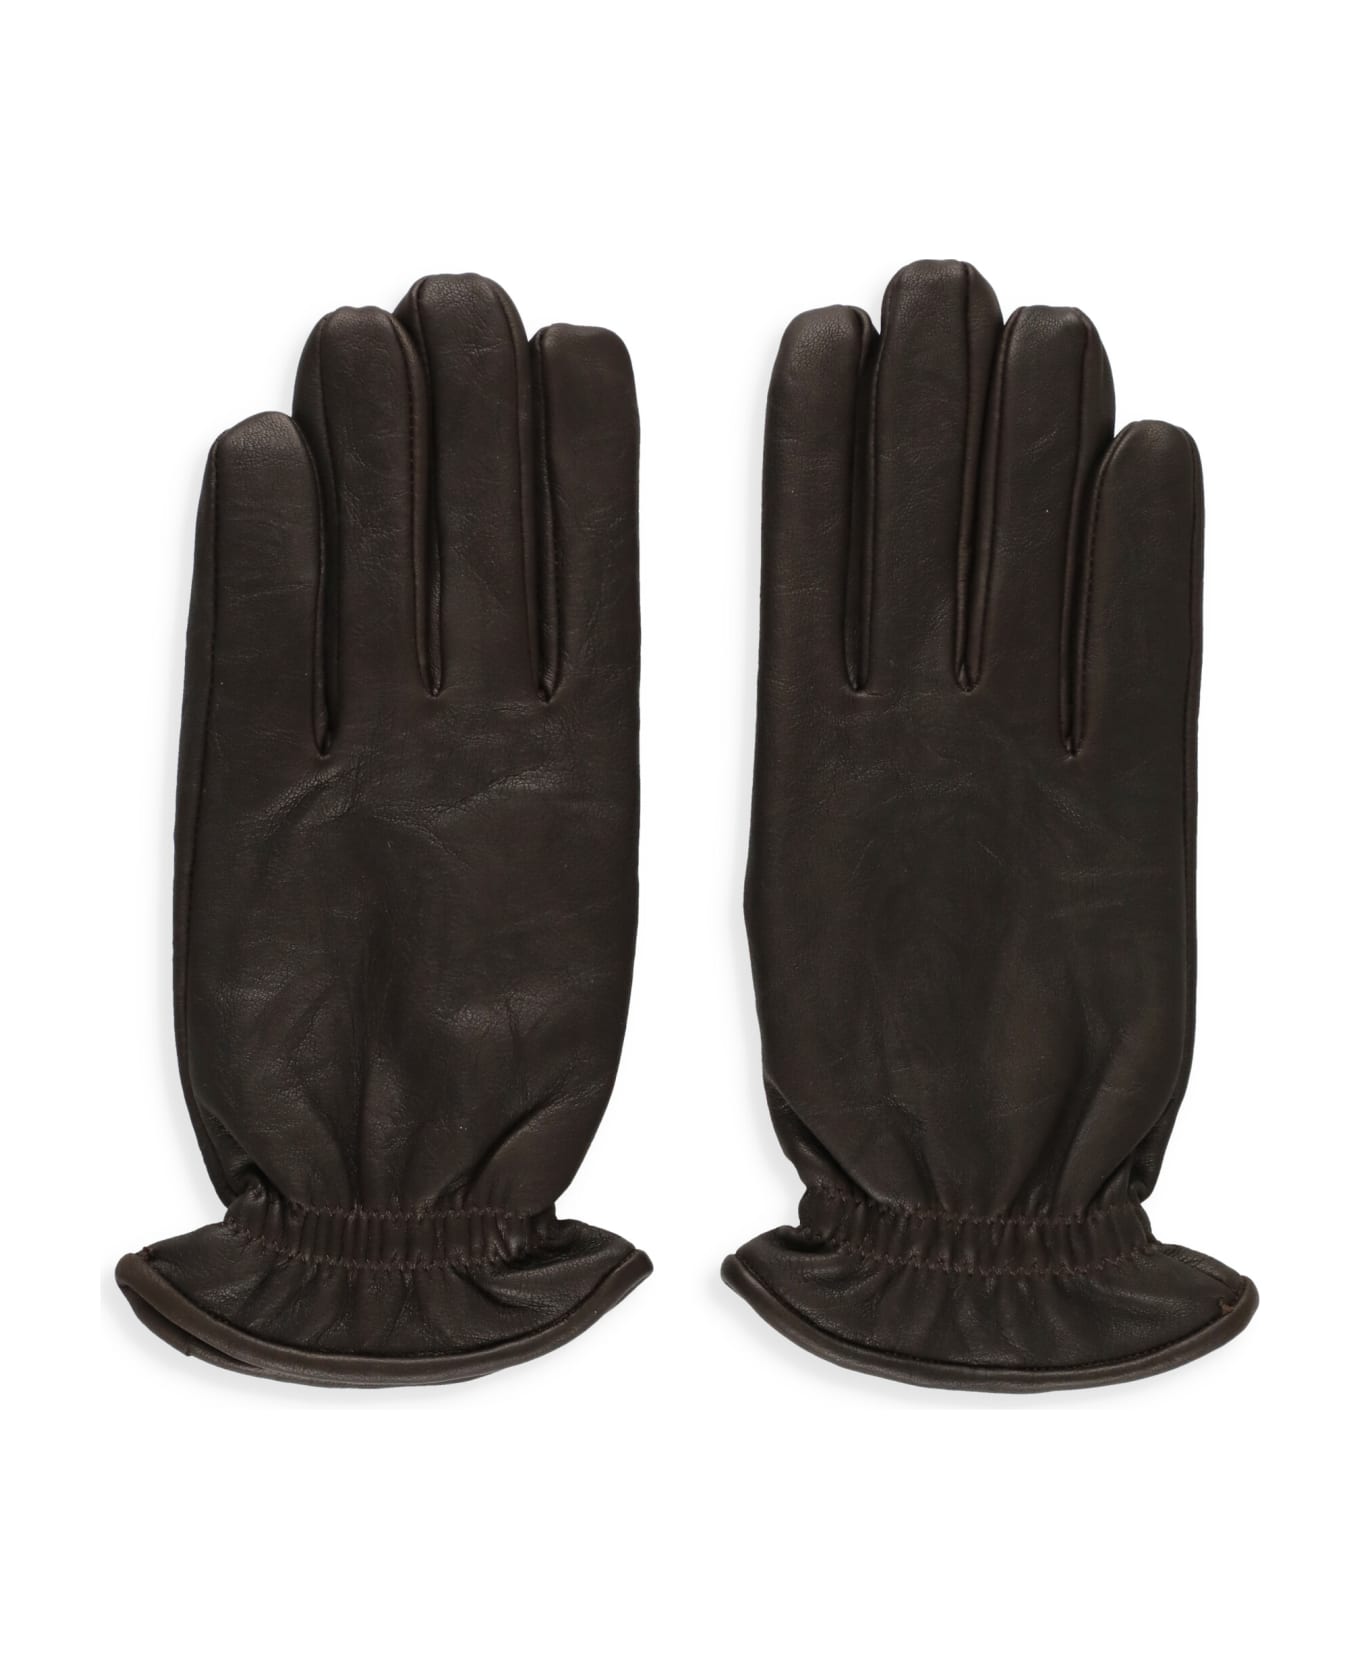 Orciani Nappa Washed Gloves - MORO